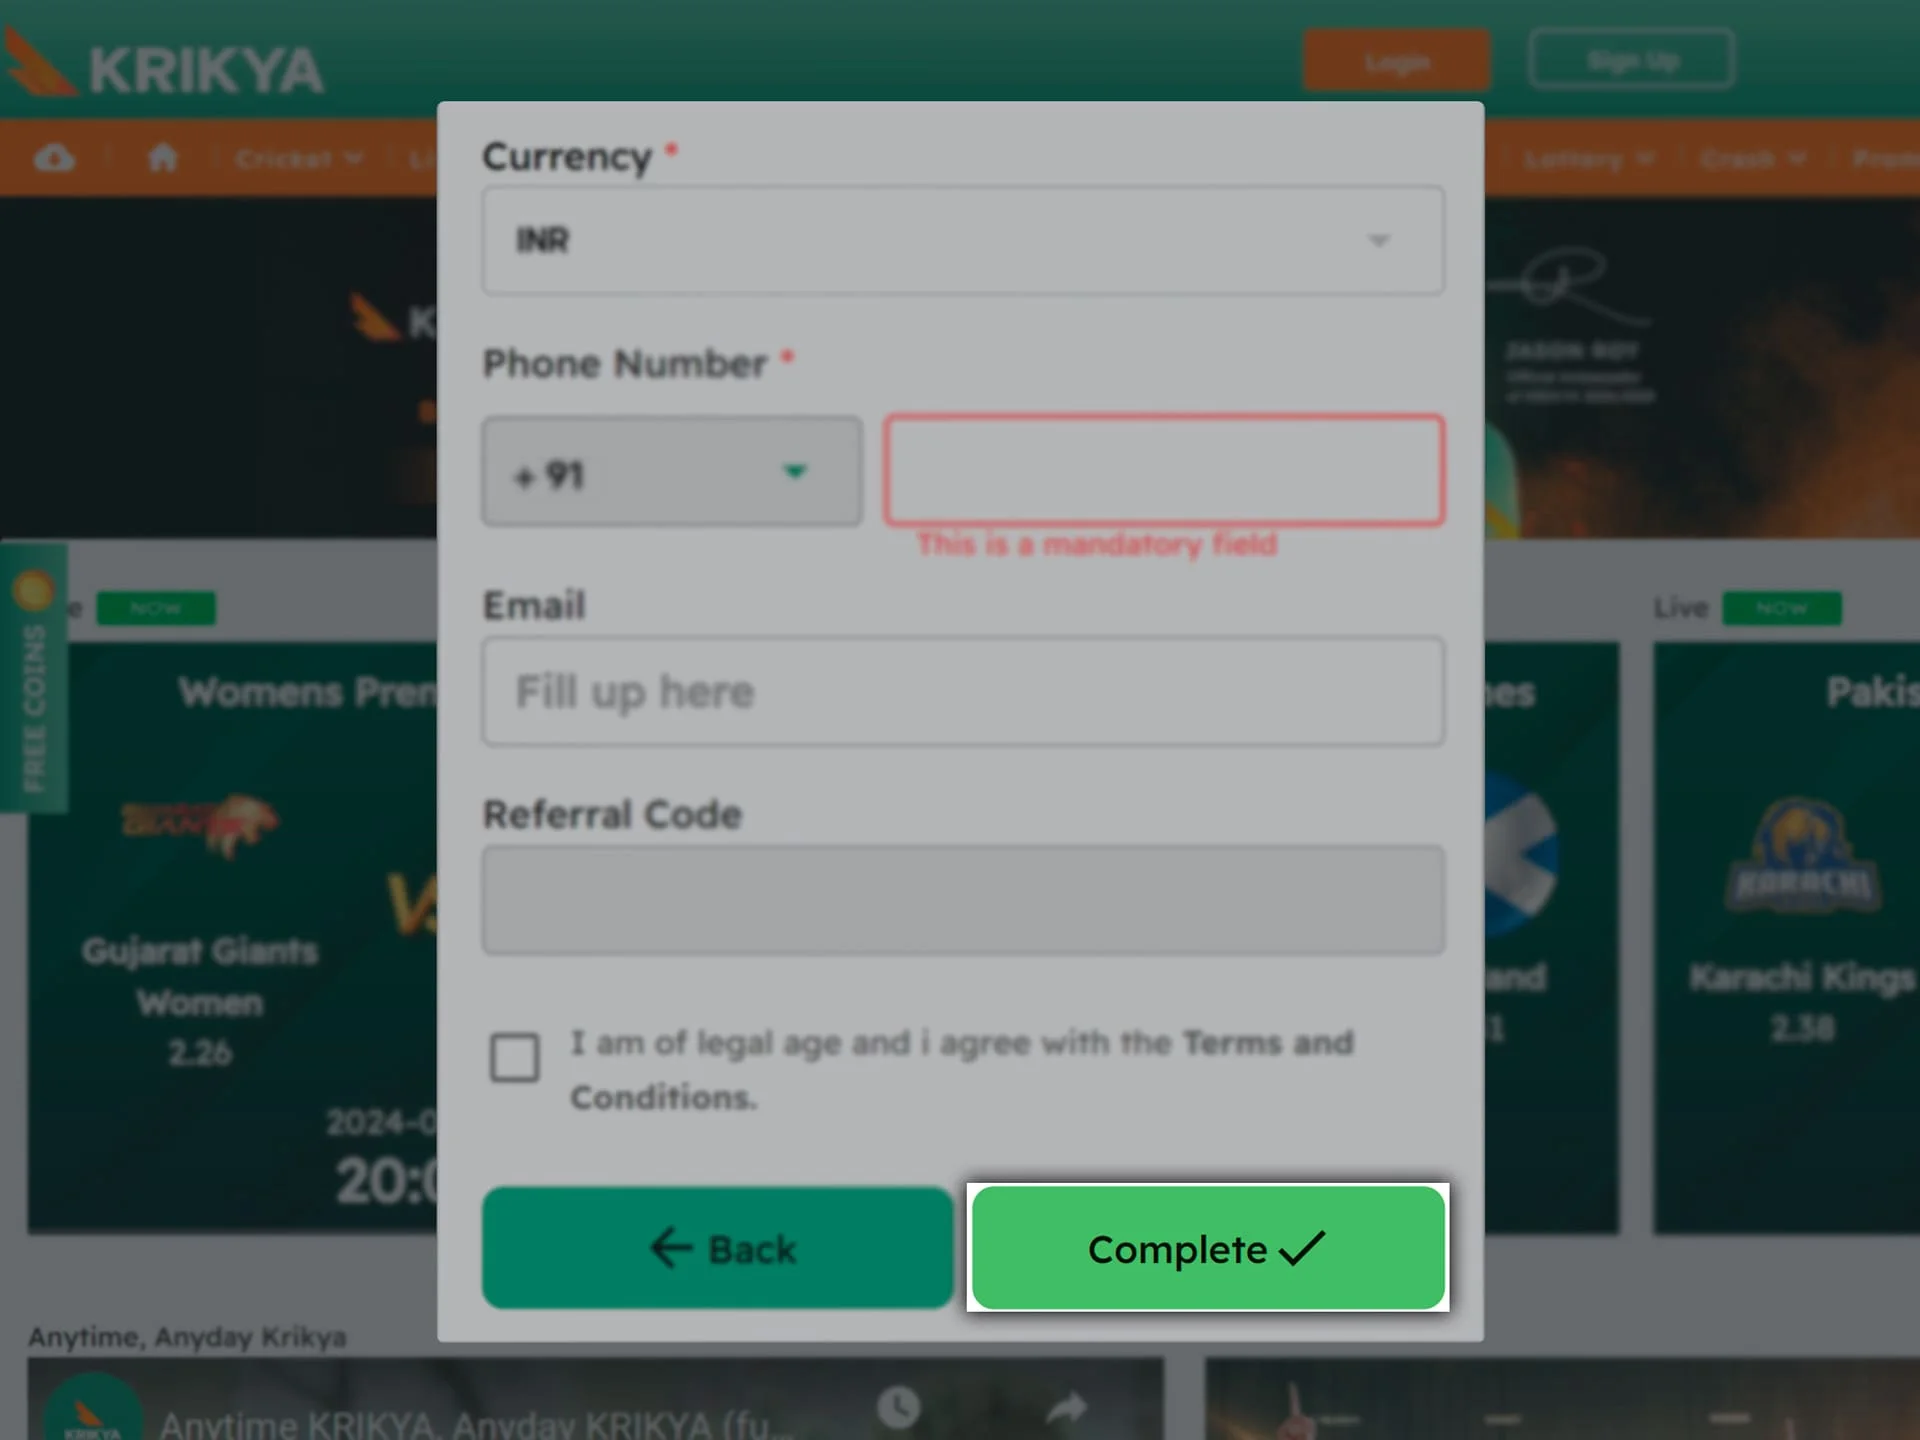 Confirm your account creation at Krikya and start playing.